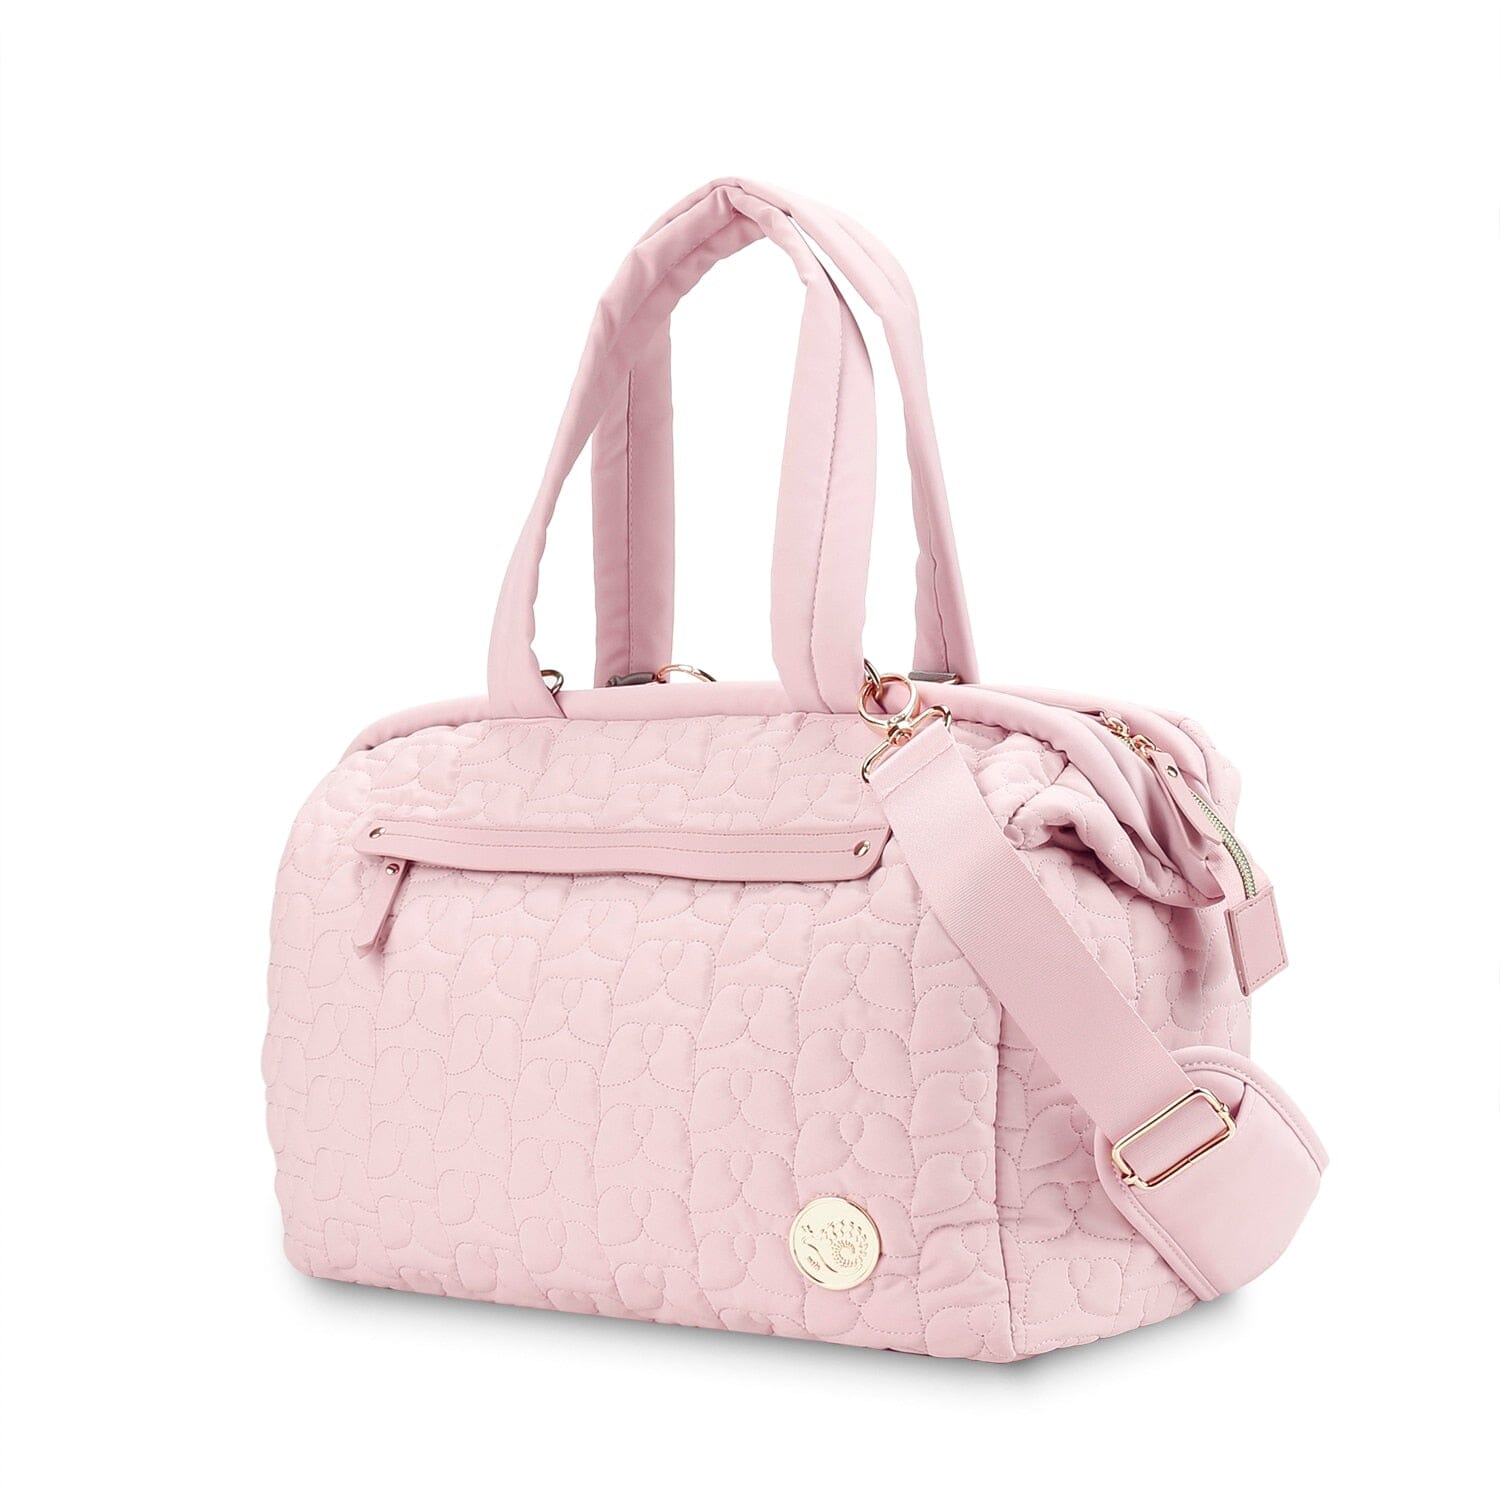 Unisex Diaper Tote The Store Bags Pink 